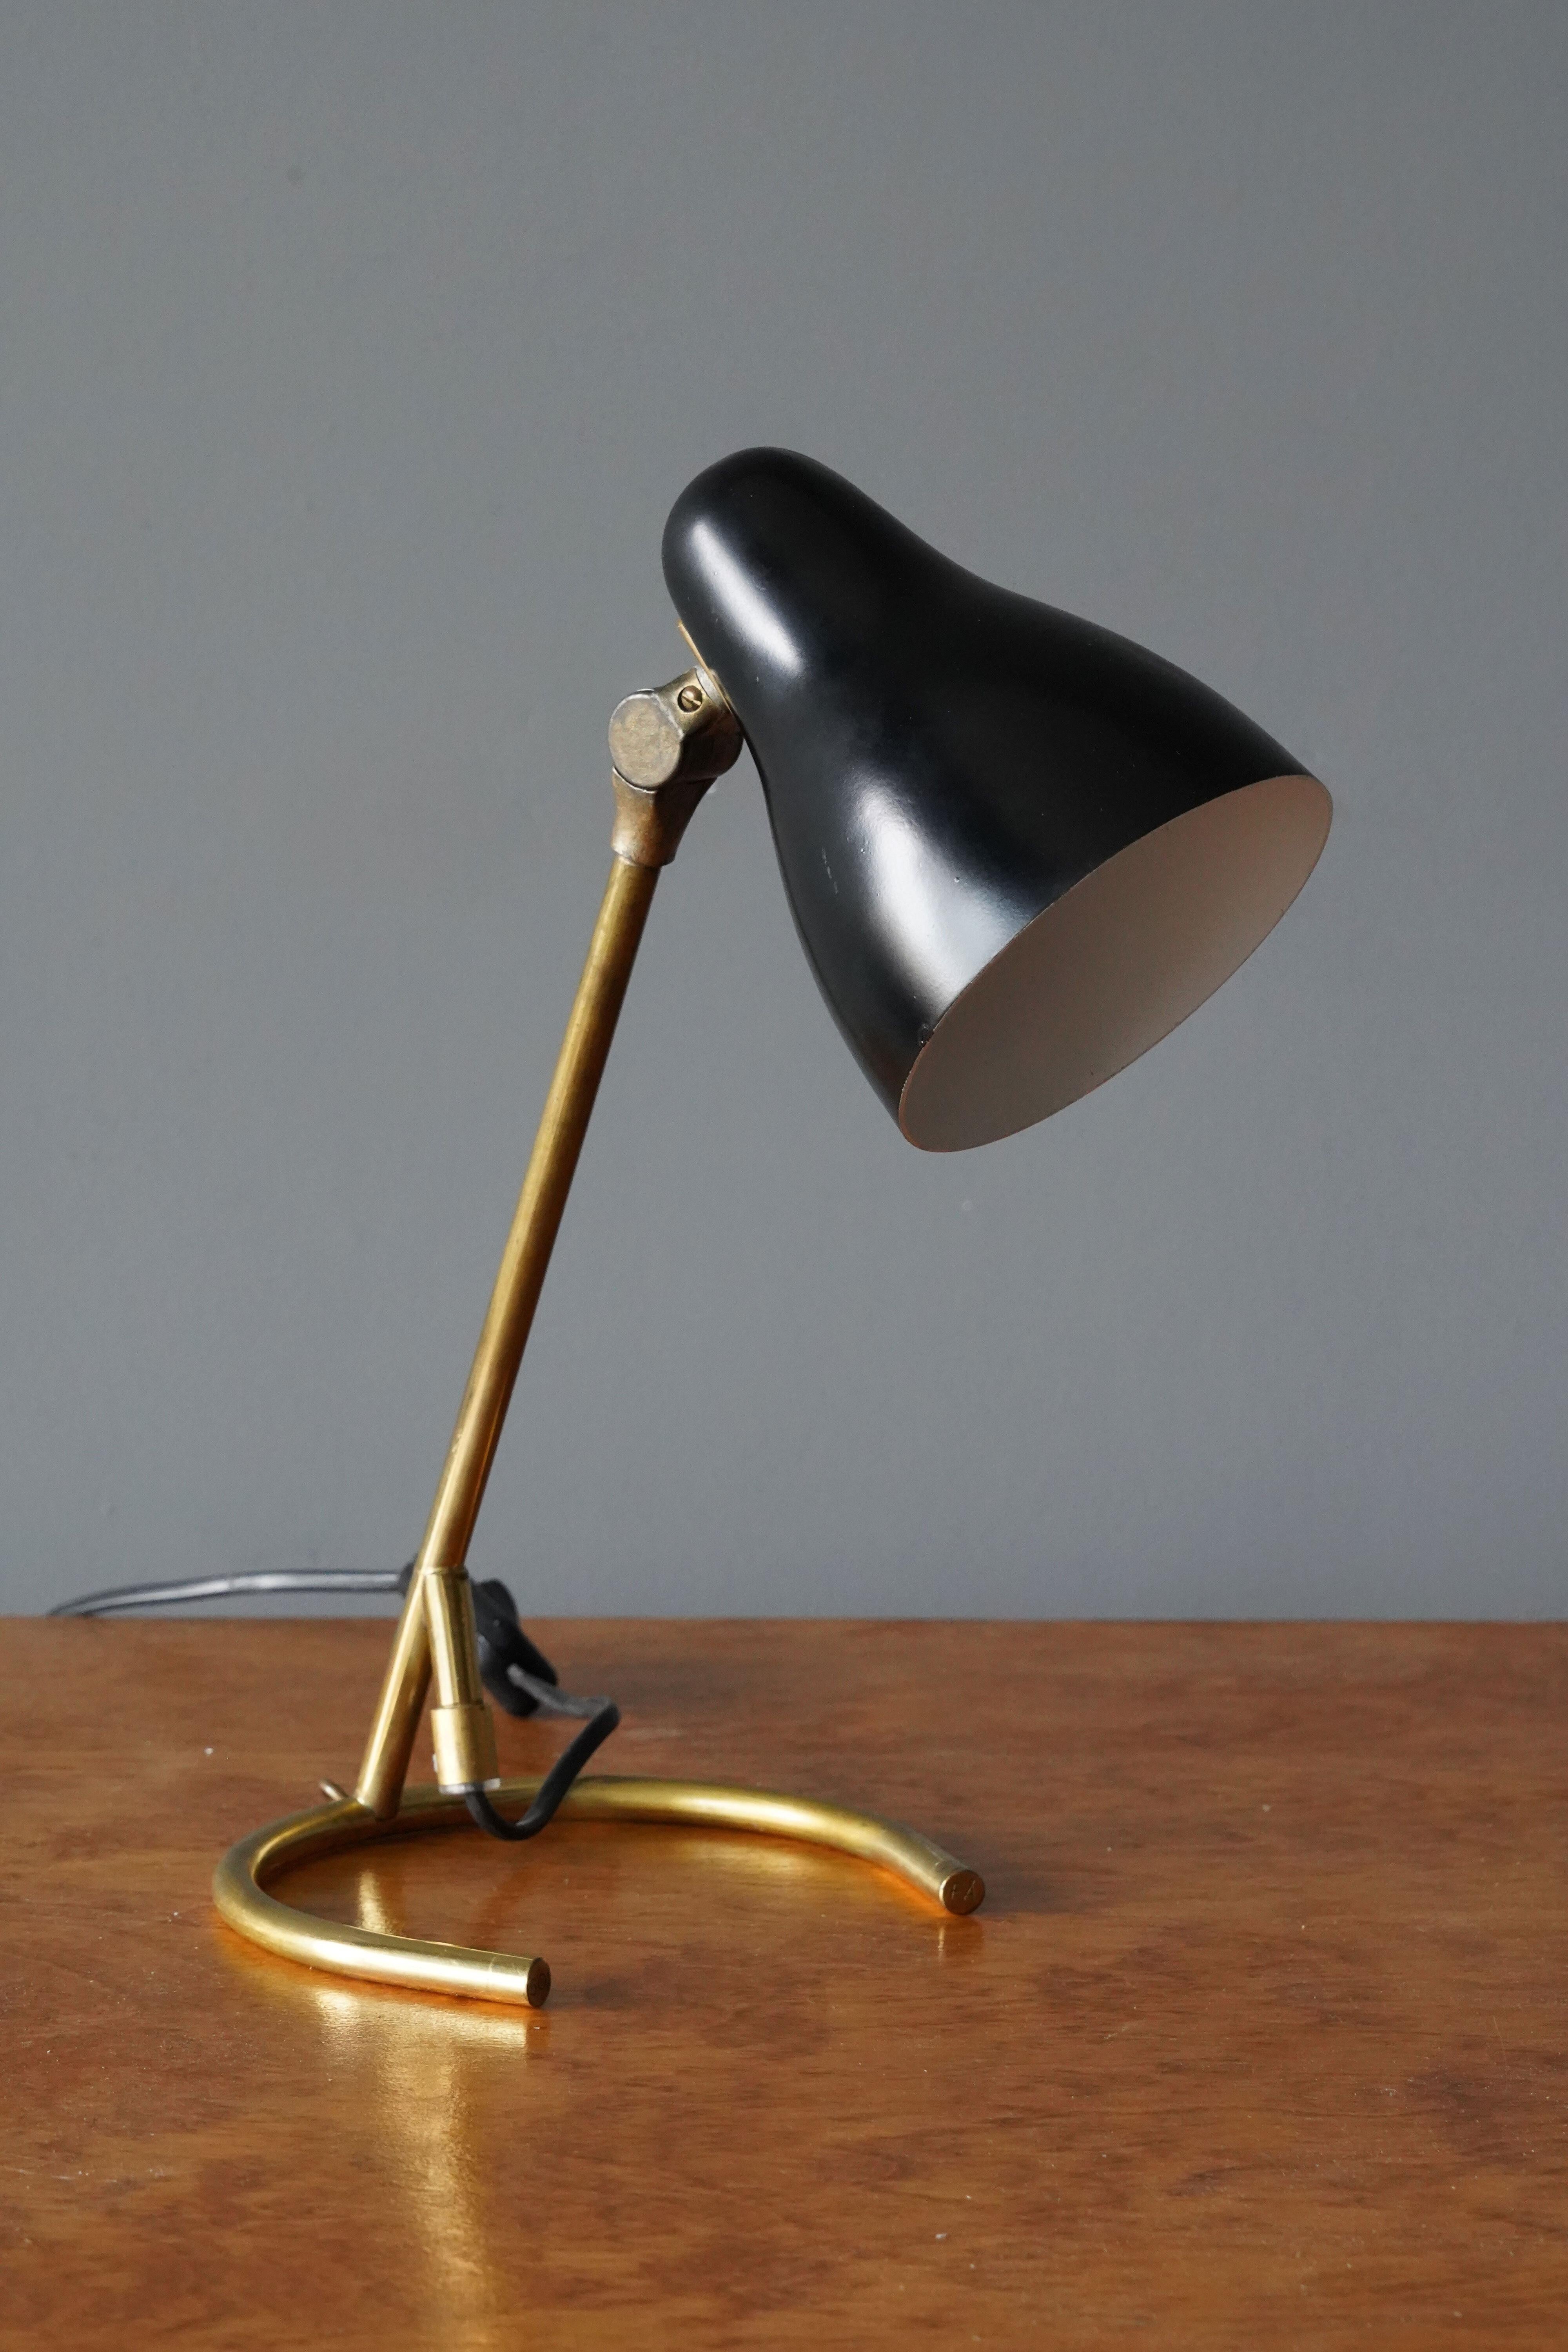 An adjustable table lamp or wall light. Designed and produced Sweden, 1950s. In brass and black-lacquered metal. 

Other designers of the period include Jean Royere, Paolo Buffa, Gino Sarfatti, Hans Bergström, and Paavo Tynell.